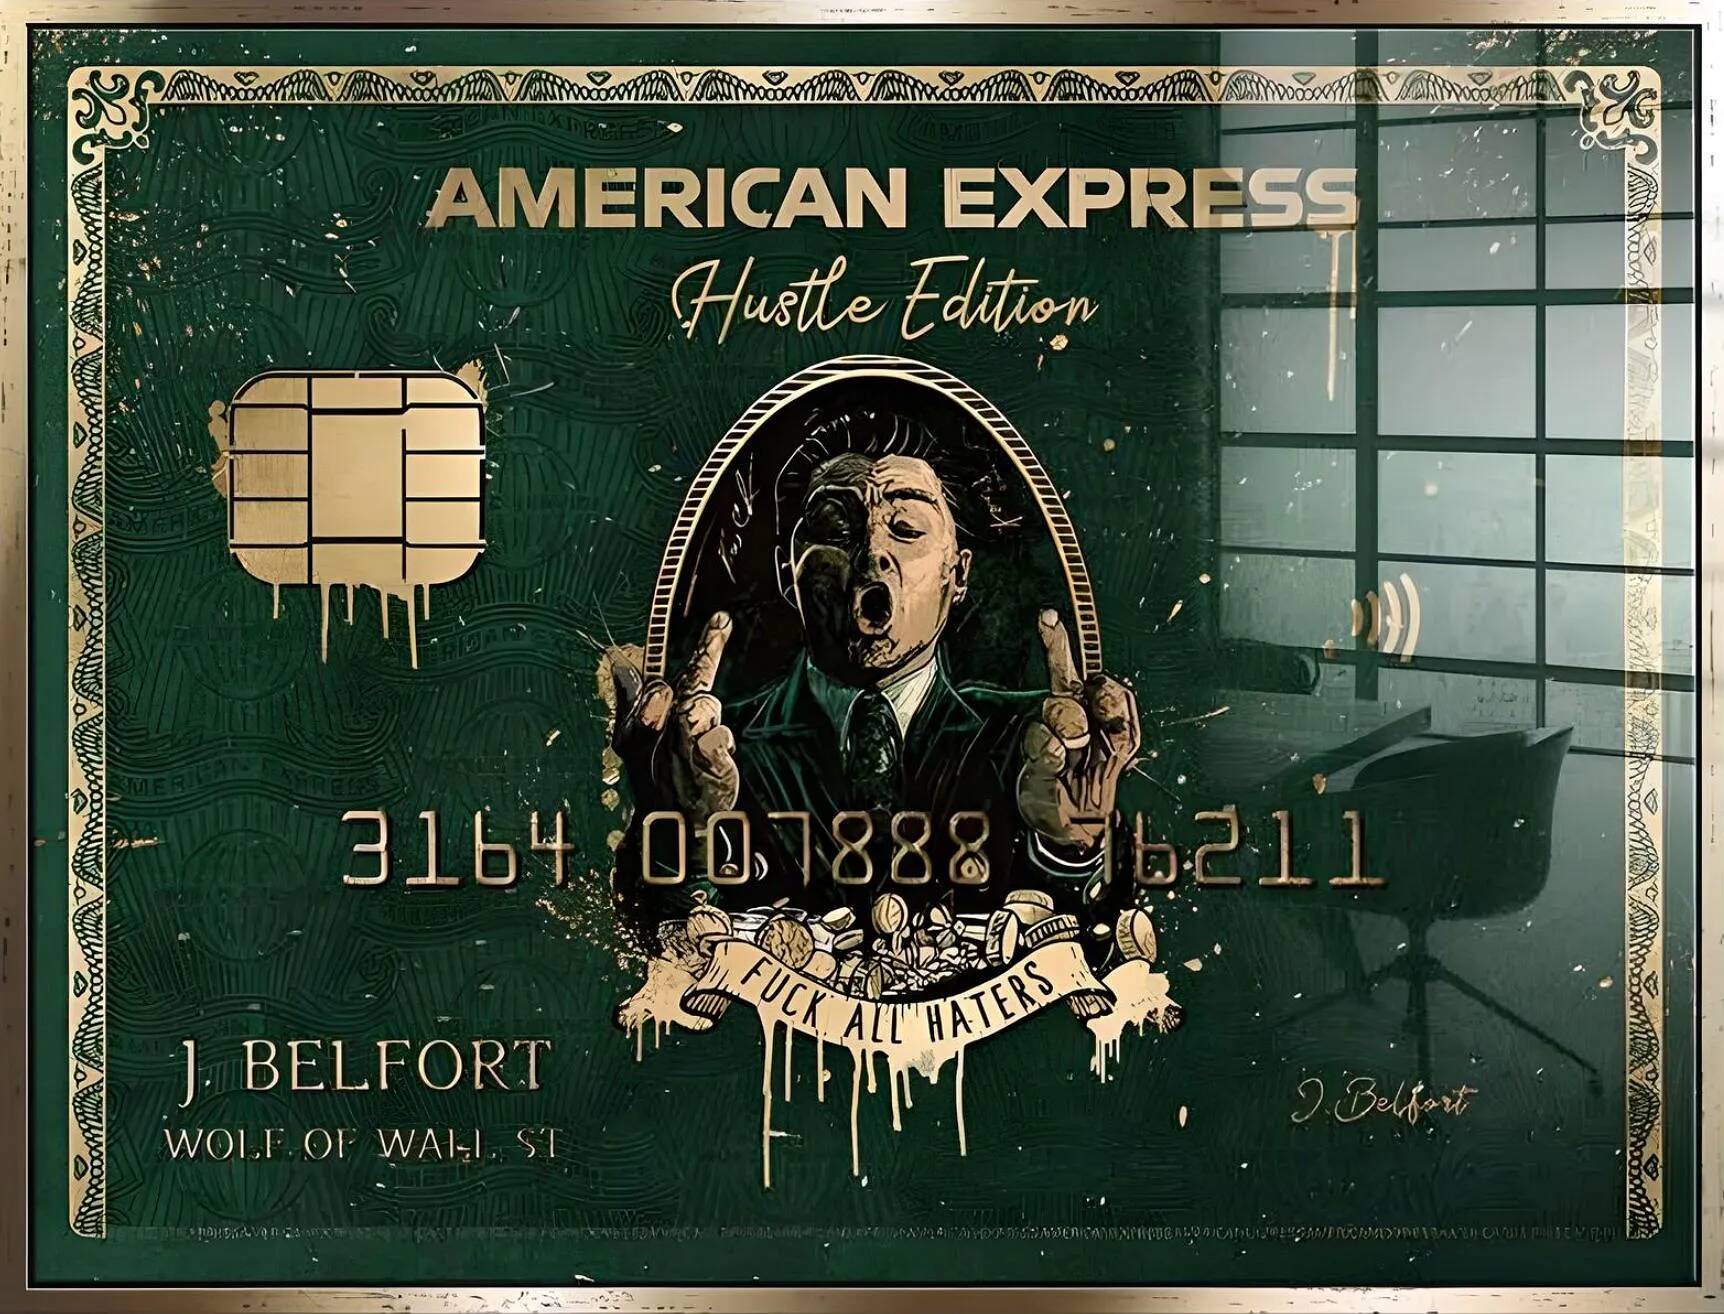 Tableau feuille d'or Royal Green American Express doré